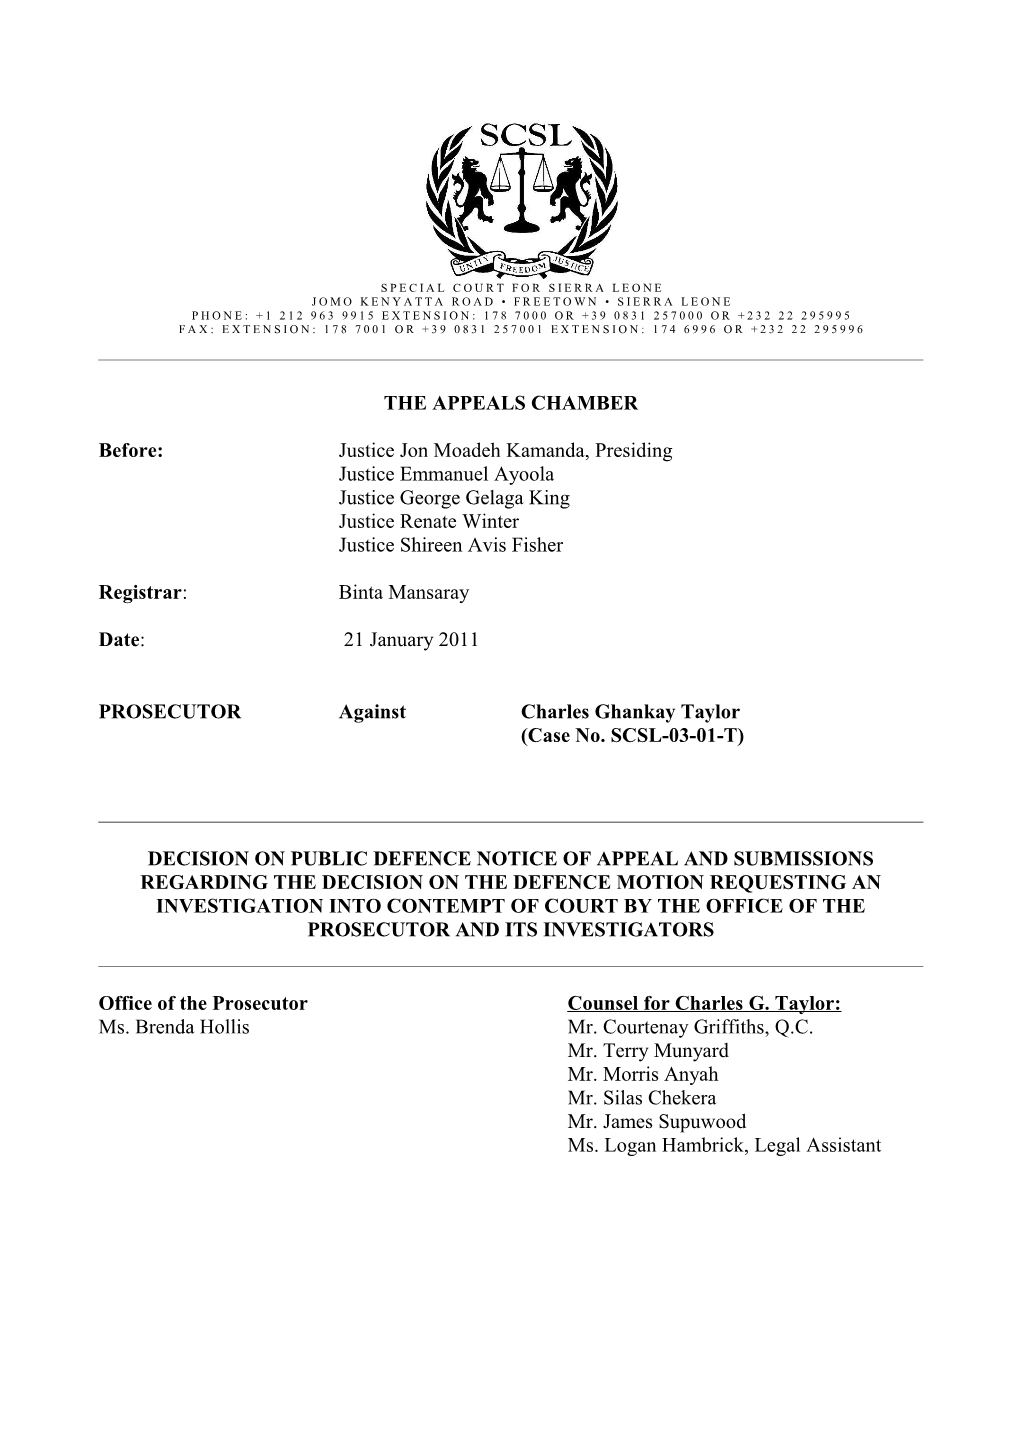 Decision on Public Defence Notice of Appeal and Submissions Regarding the Decision on The